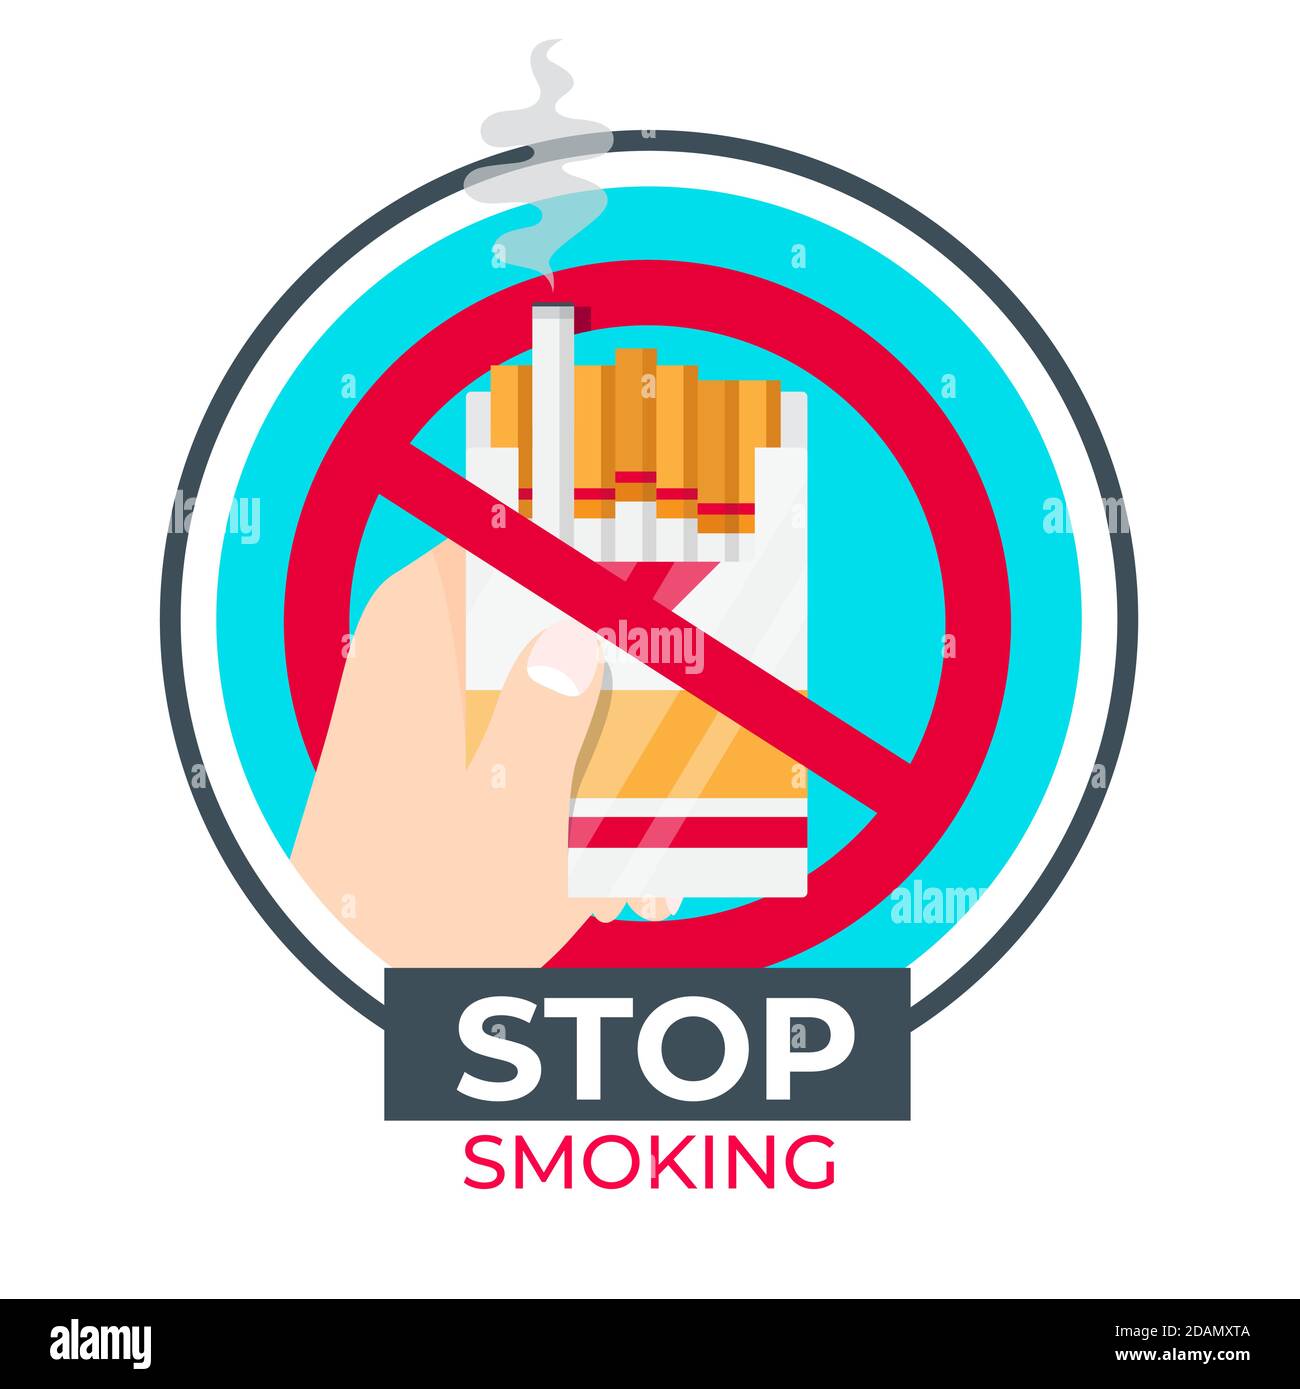 quit-smoking-pack-of-cigarettes-template-vector-illustration-stock